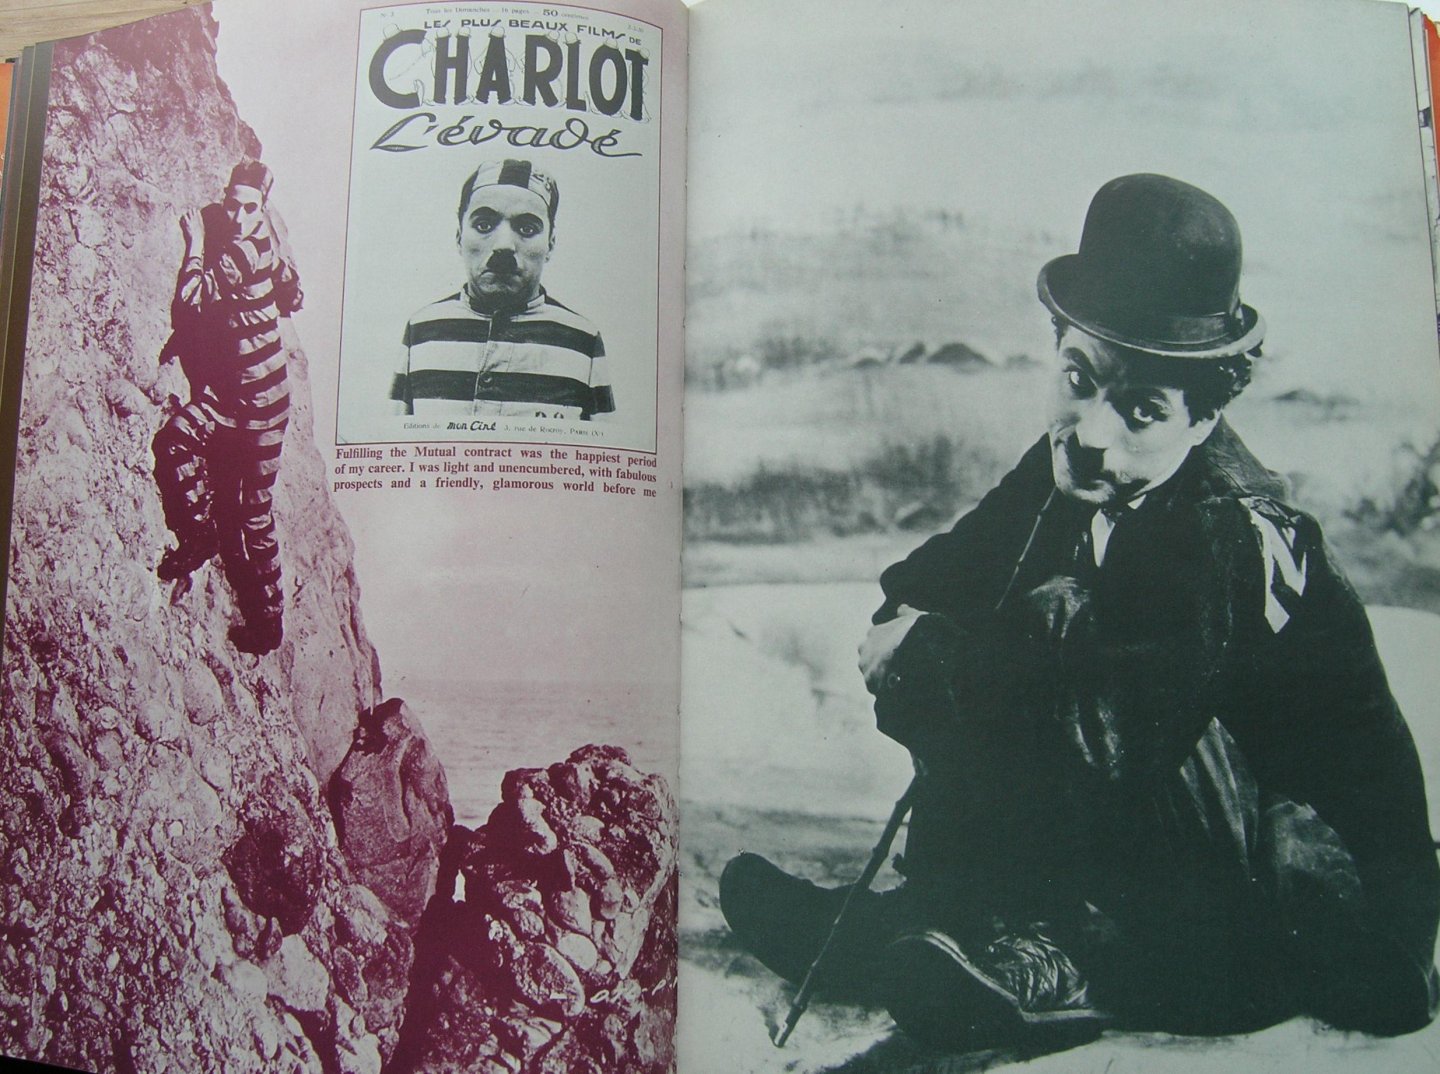 Wyndham, Francis - My Life in Pictures by Charles Chaplin